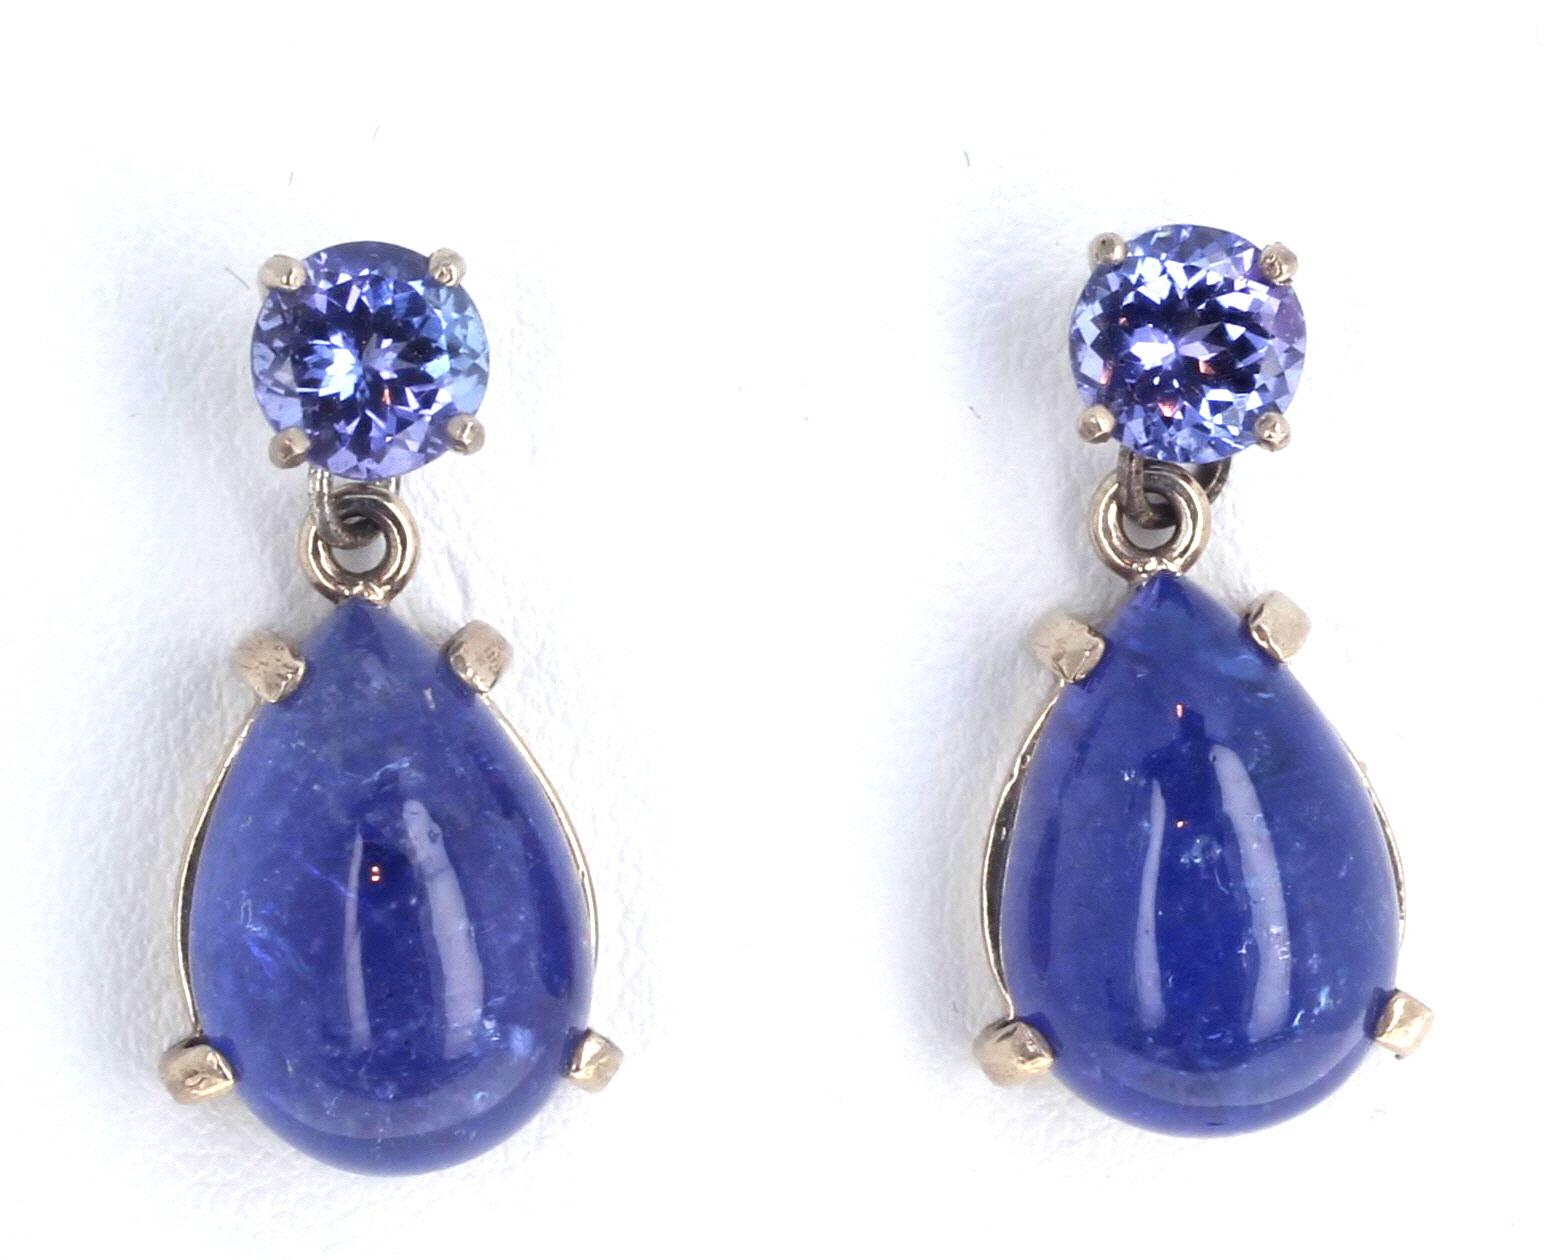 The glittering round natural blue Tanzanites (6mm) dangle natural beautiful blue Tanzanite cabochons (15mm x 11mm) in these white gold earrings.  The total length of the earrings is 26mm.  